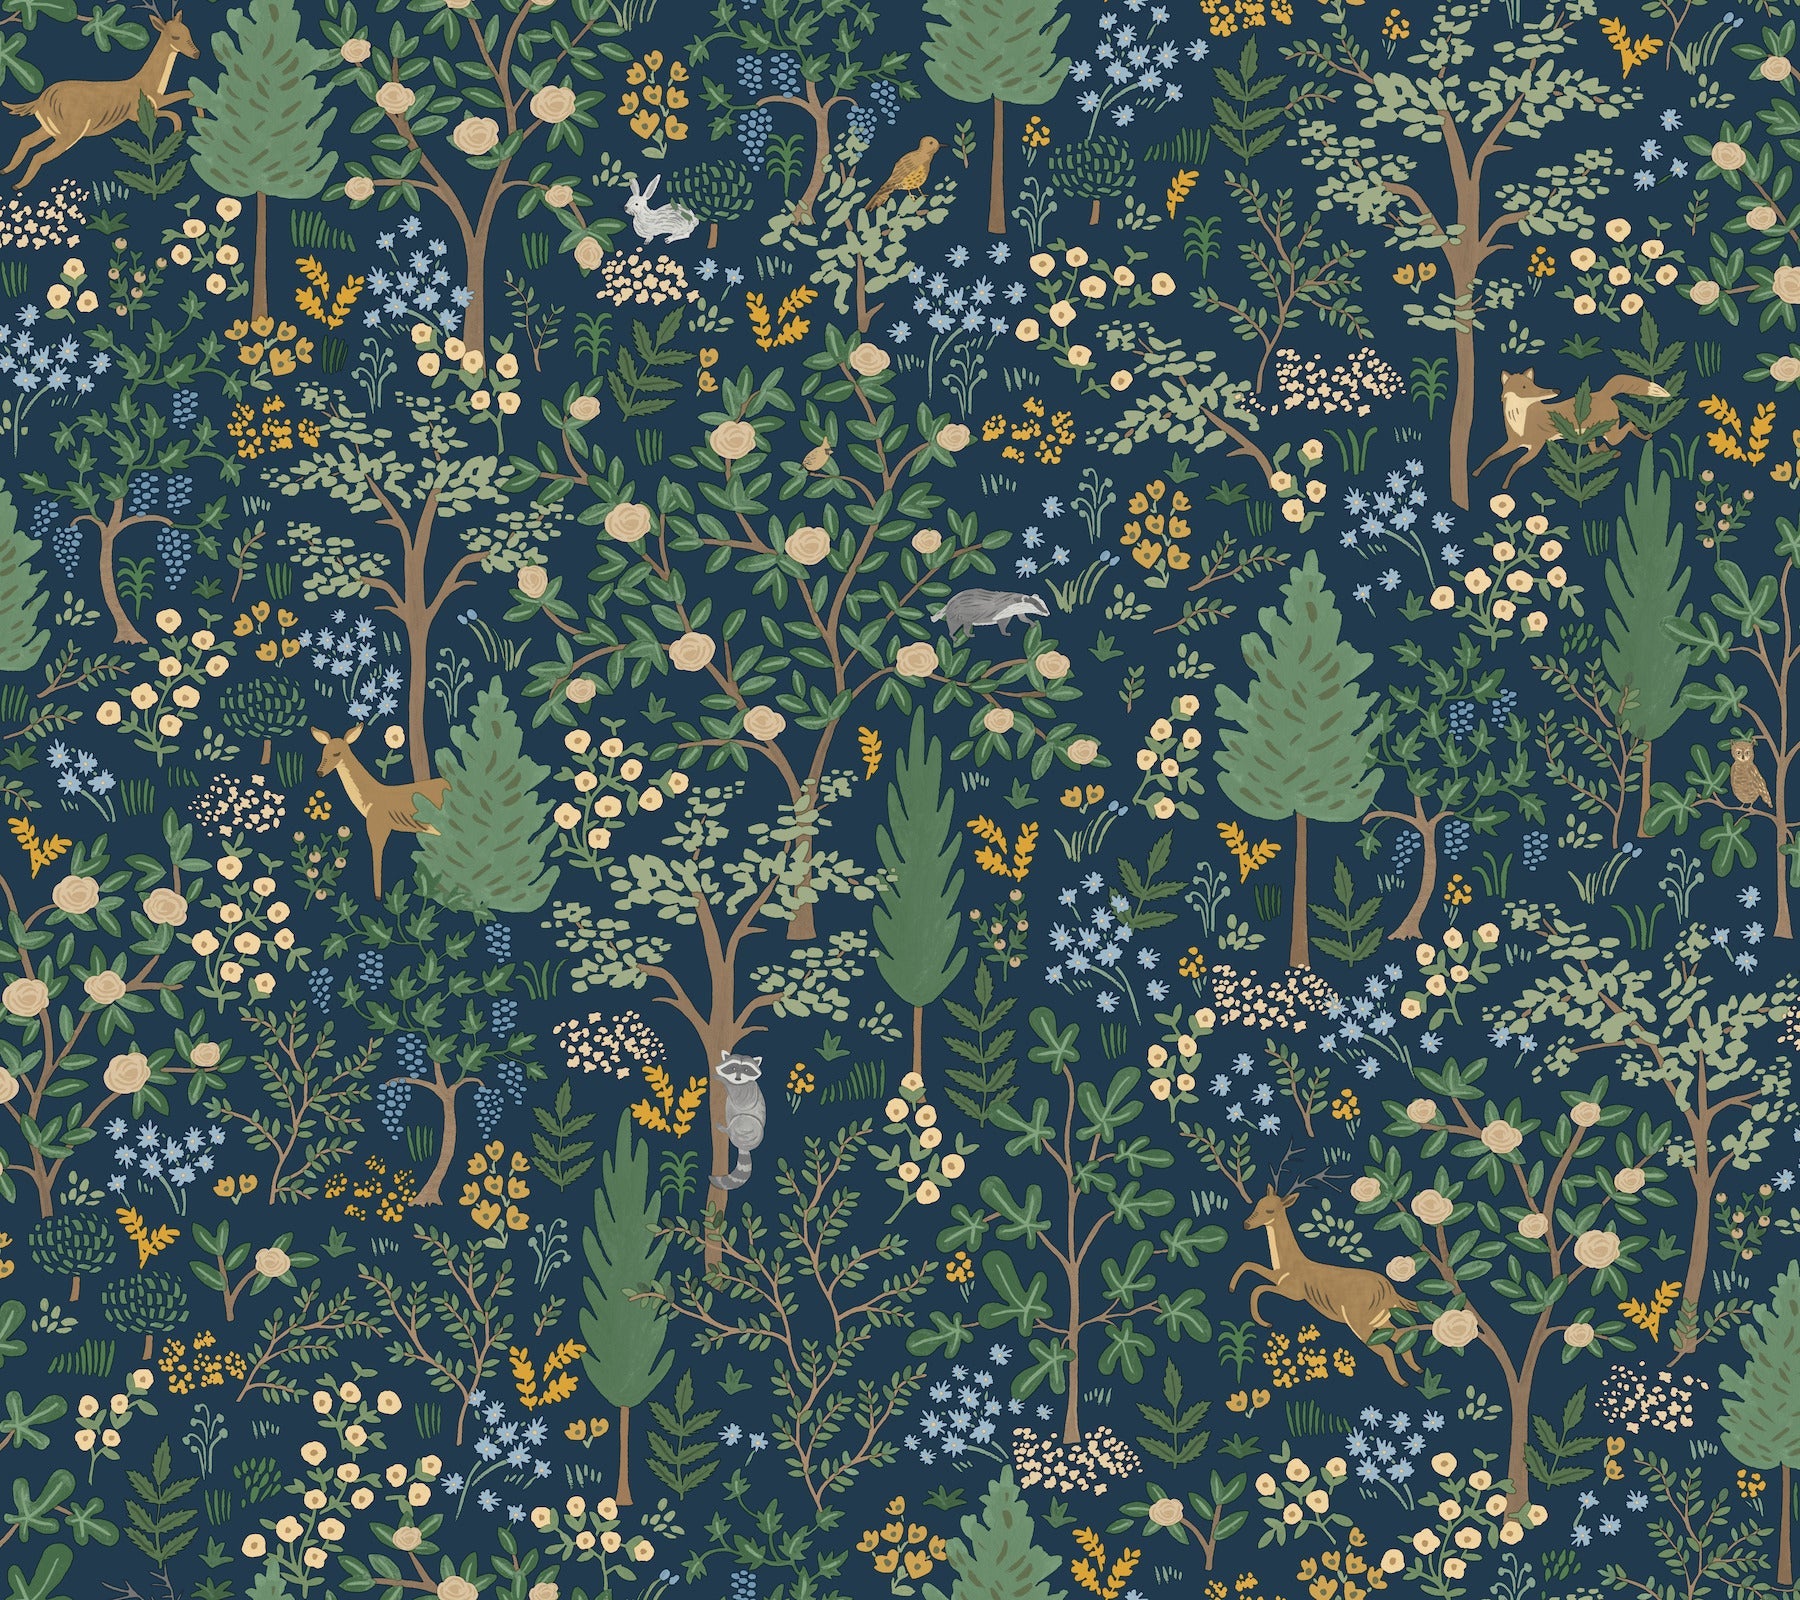 Woodland Peel + Stick Wallpaper Peel and Stick Wallpaper Rifle Paper Co. Roll Navy 